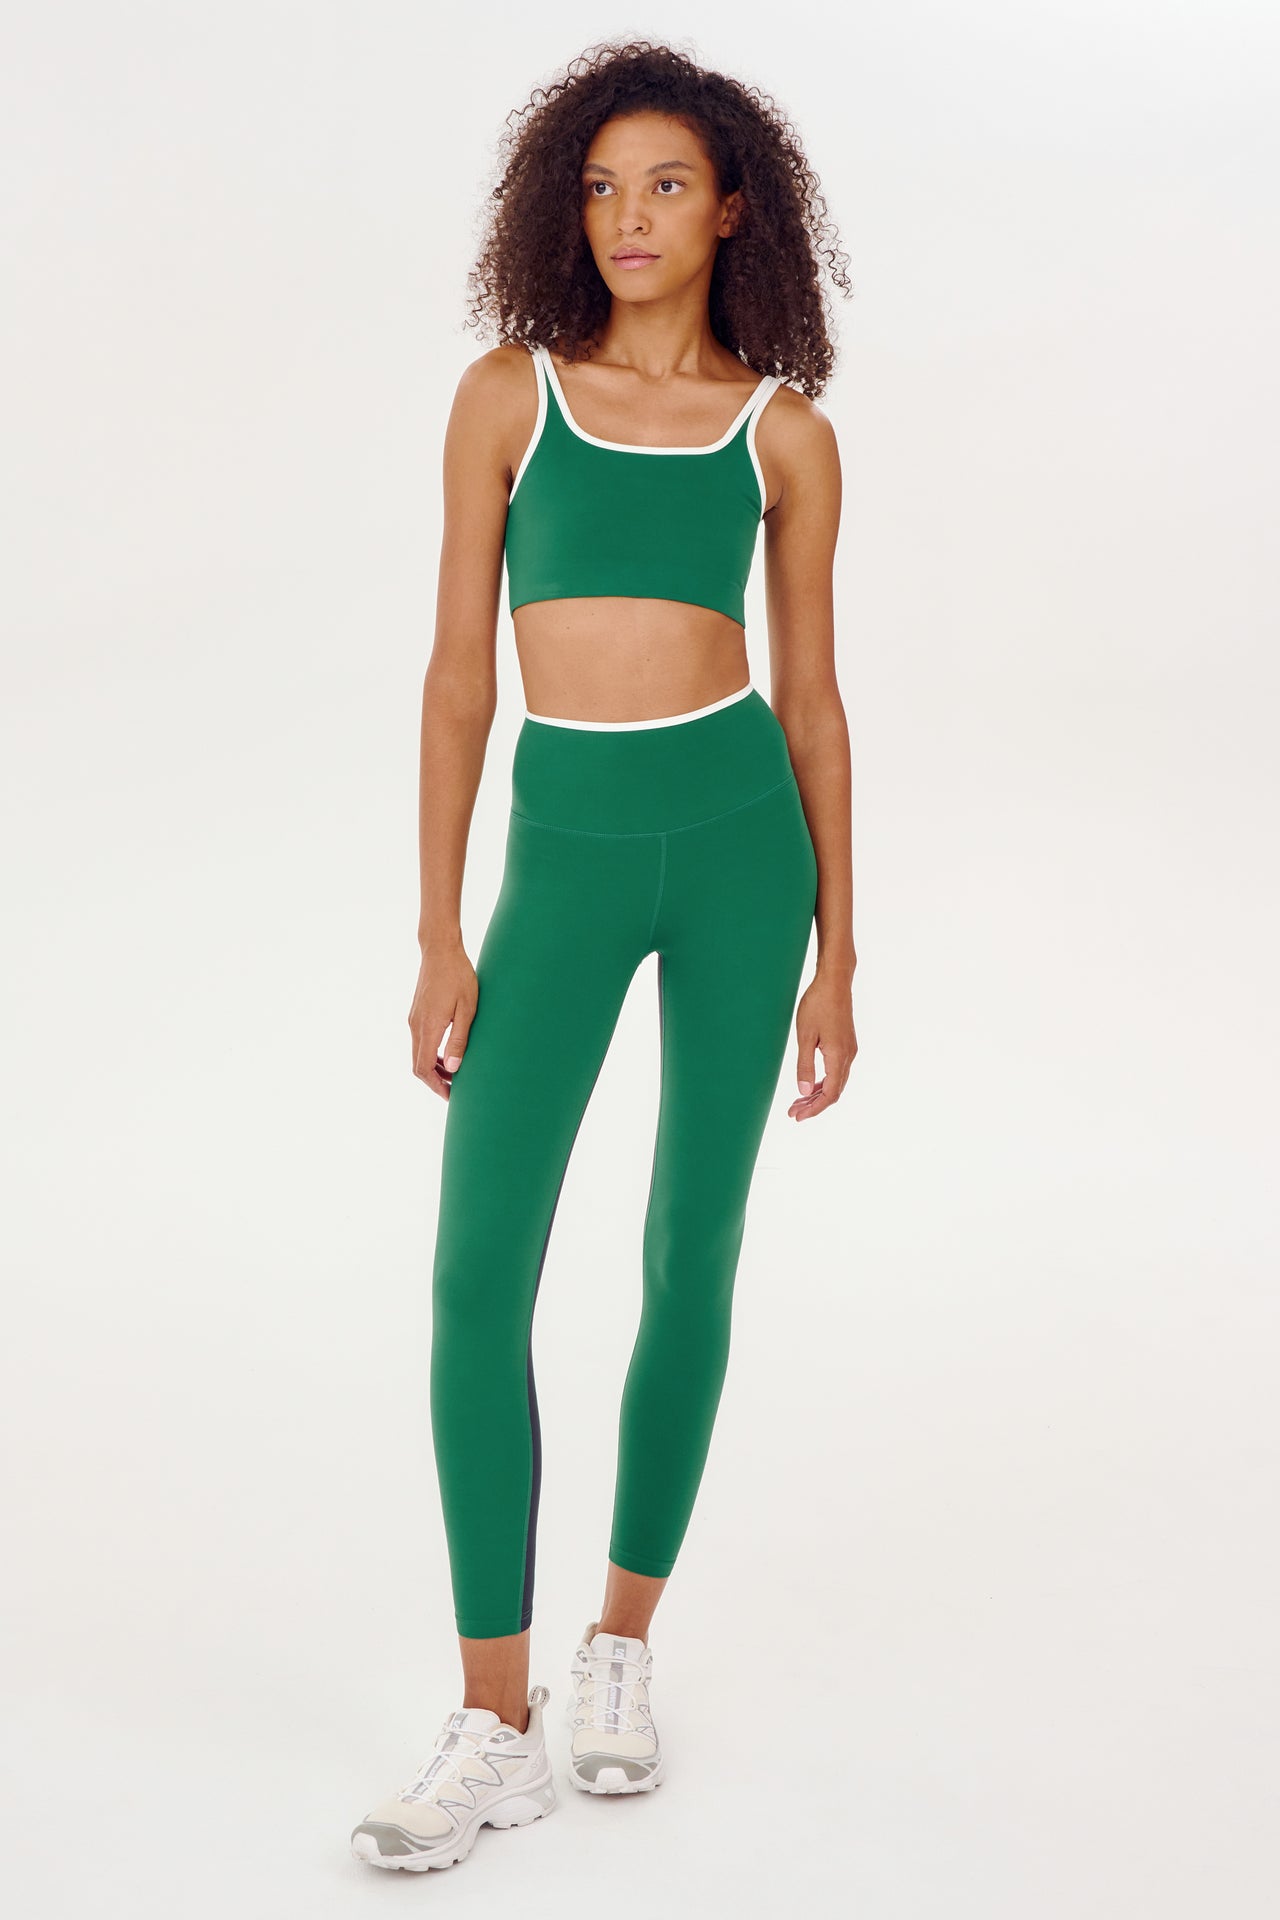 A woman wearing a Cait Rigor Bra in Arugula/White by SPLITS59 and high waist leggings made of high performance fabric.